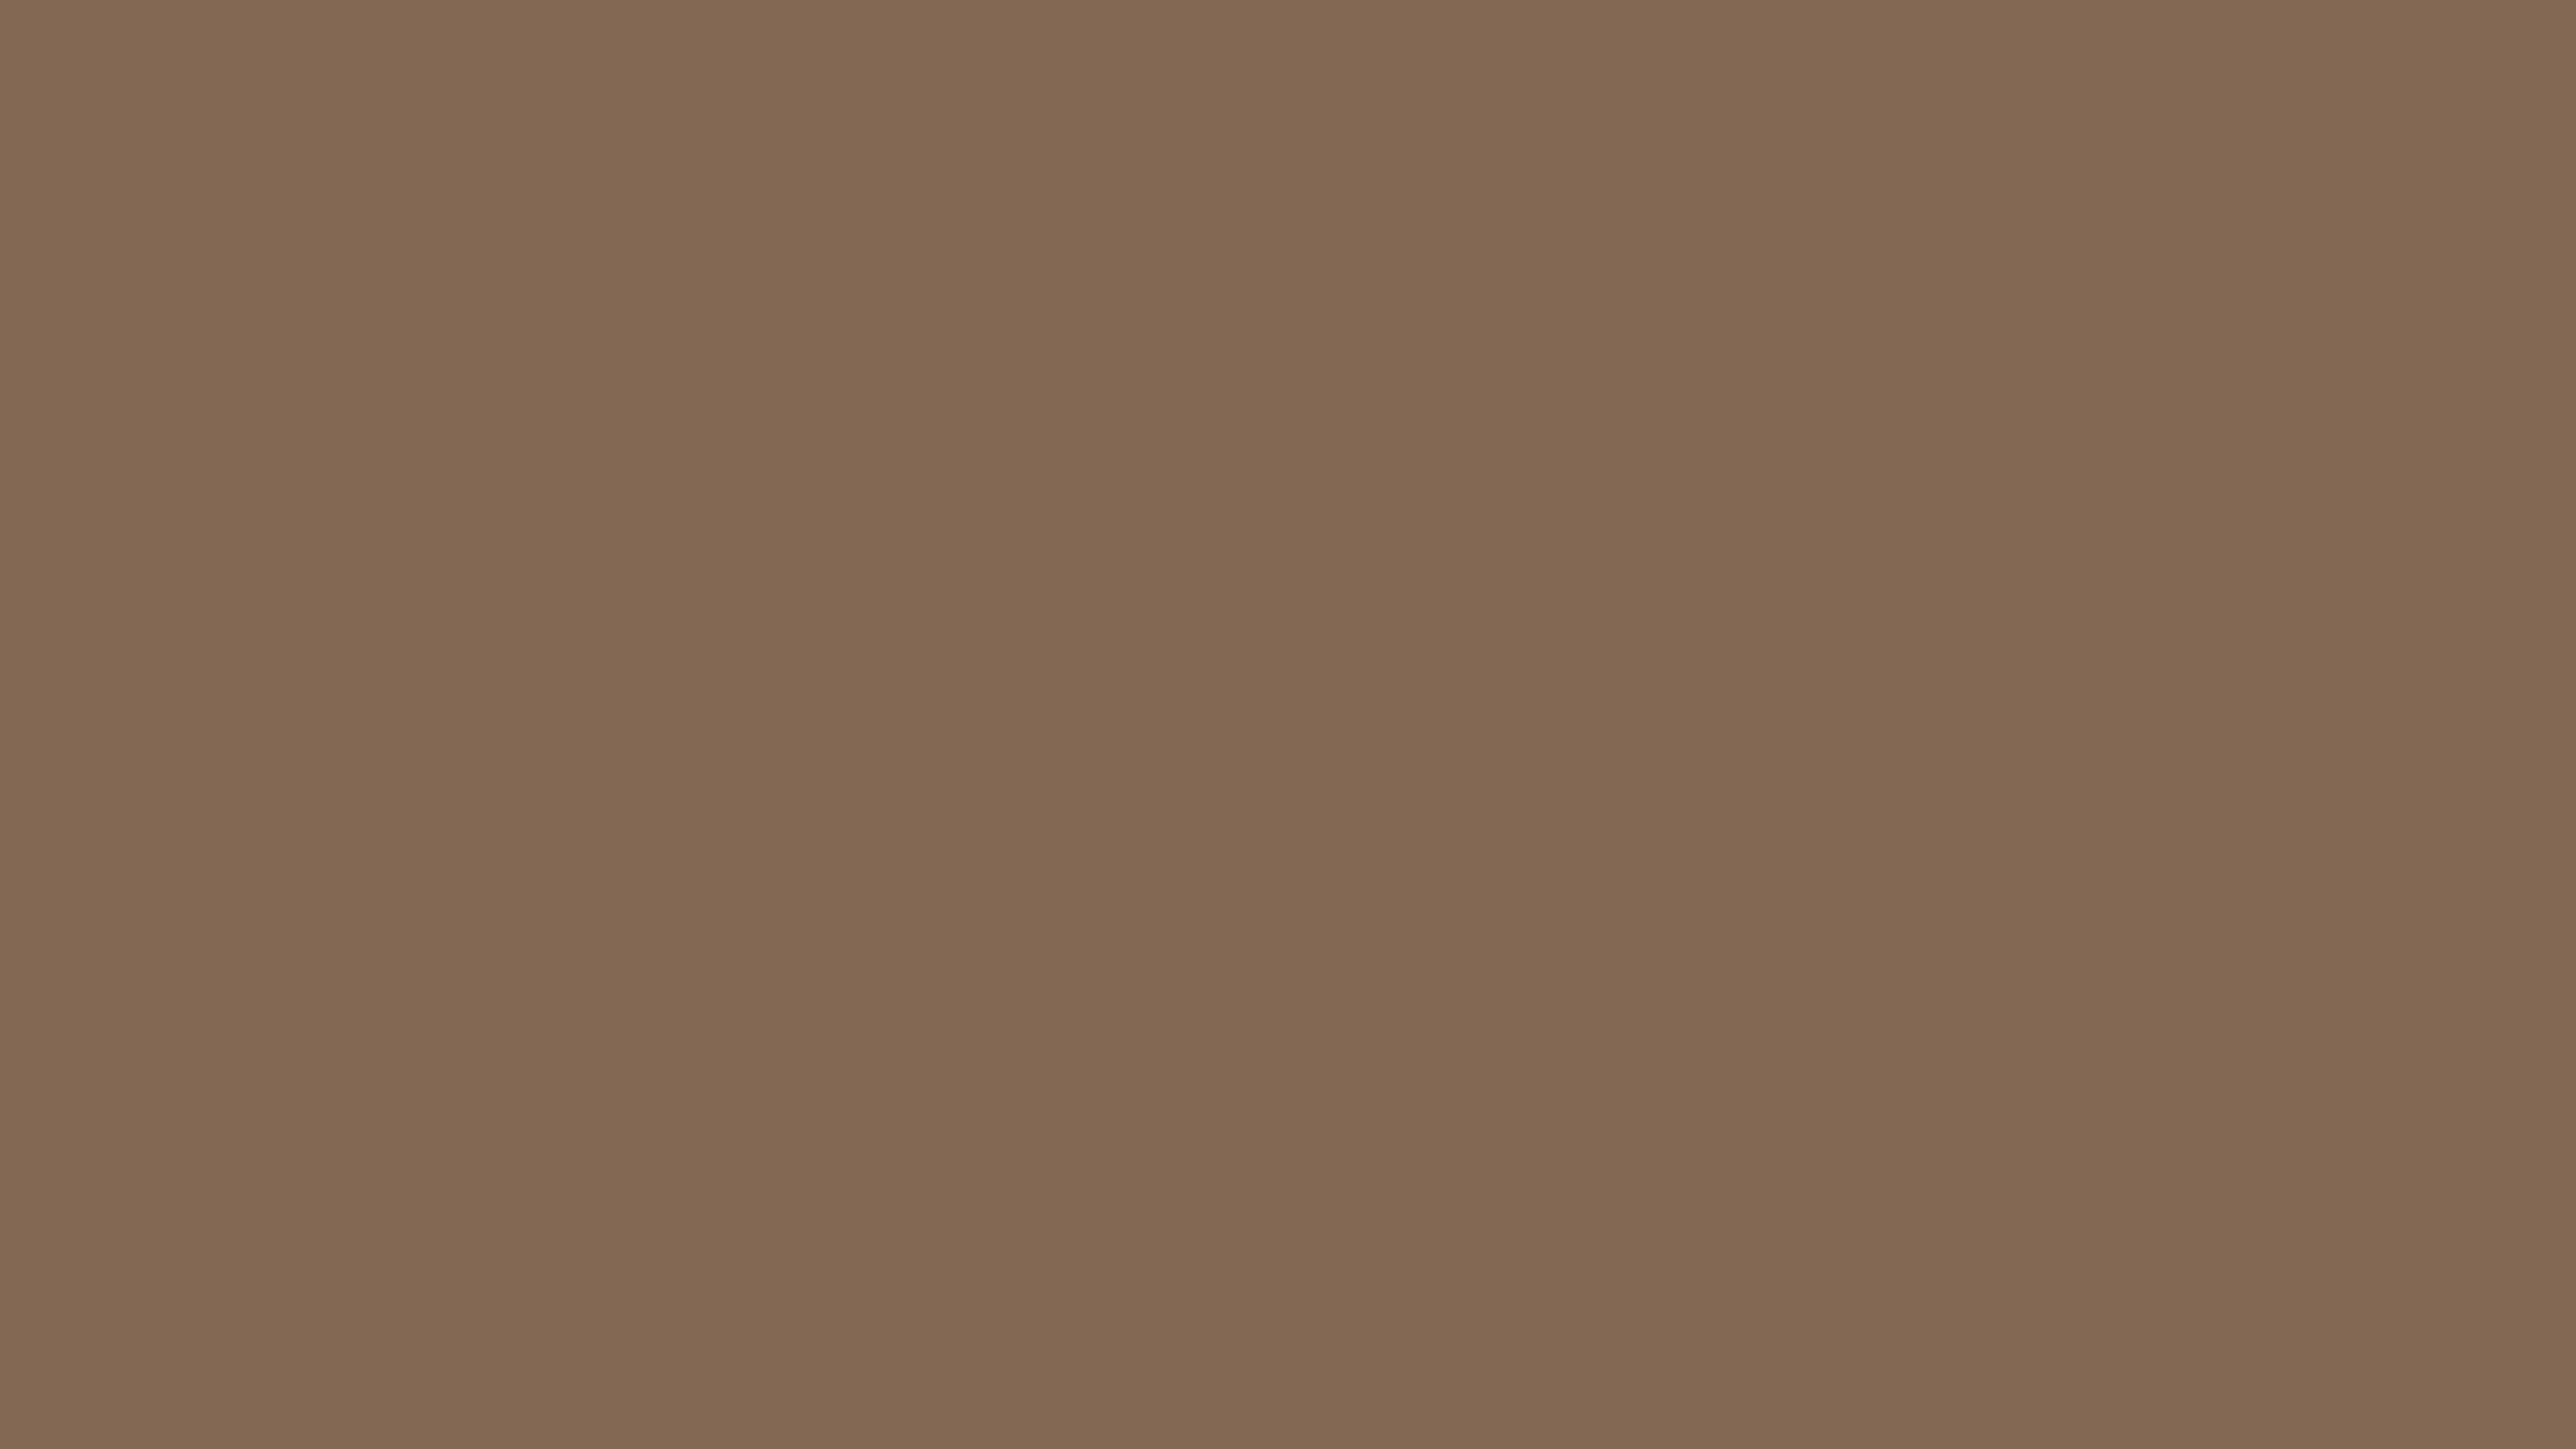 4096x2304 Pastel Brown Solid Color Background